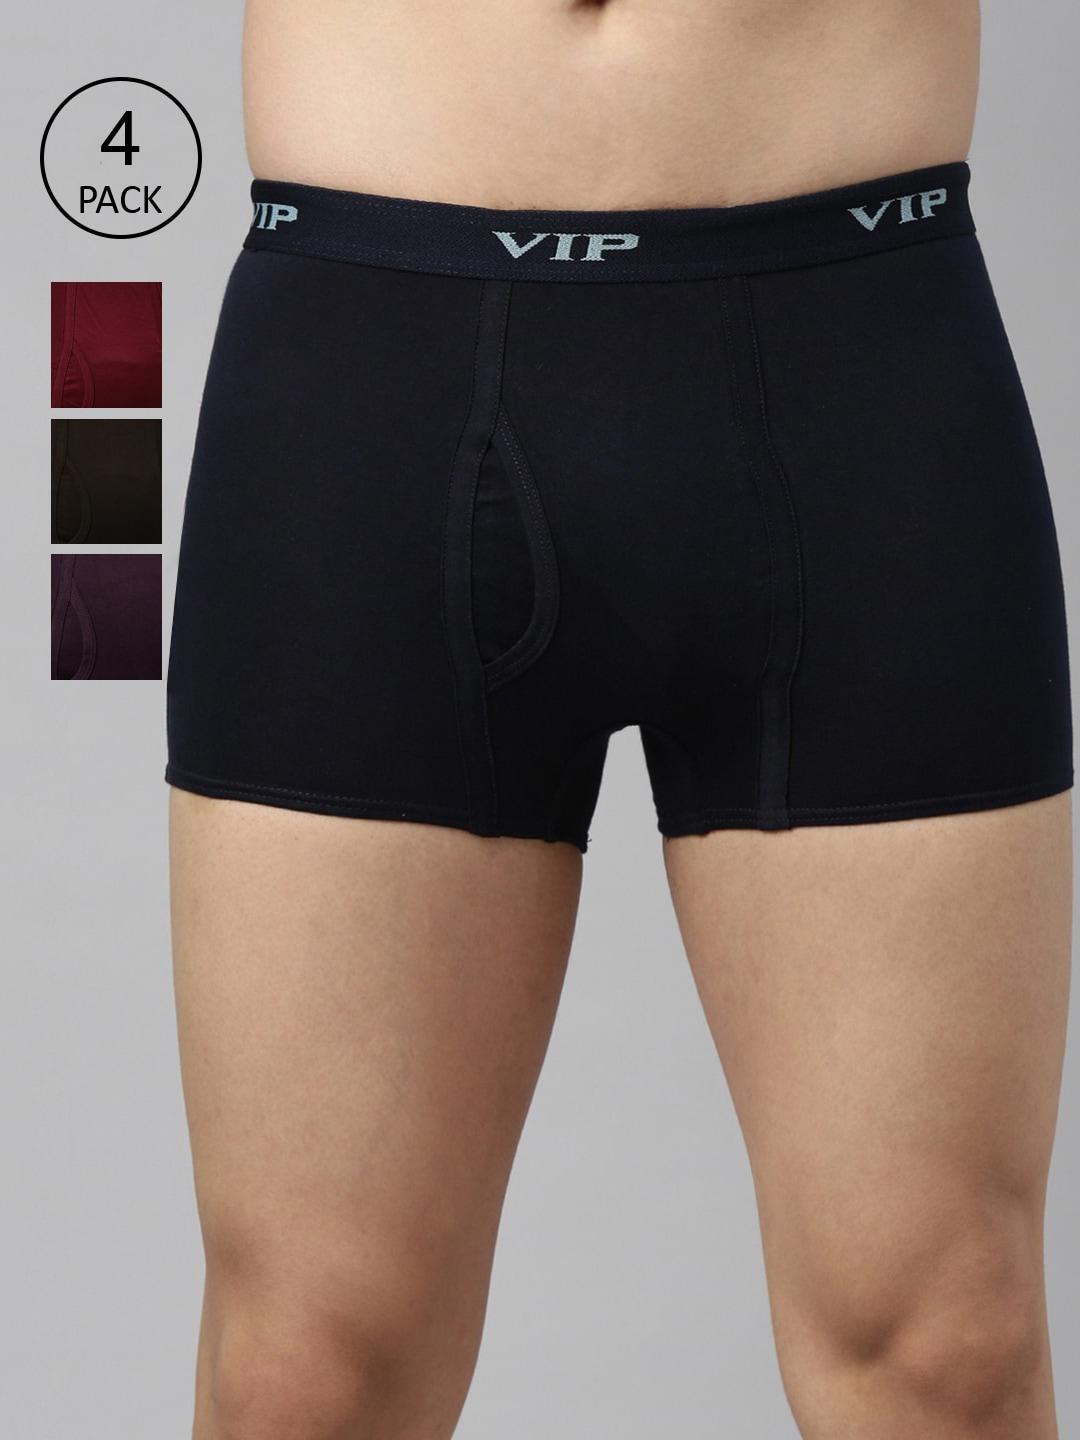 vip men pack of 4 assorted pure cotton trunks